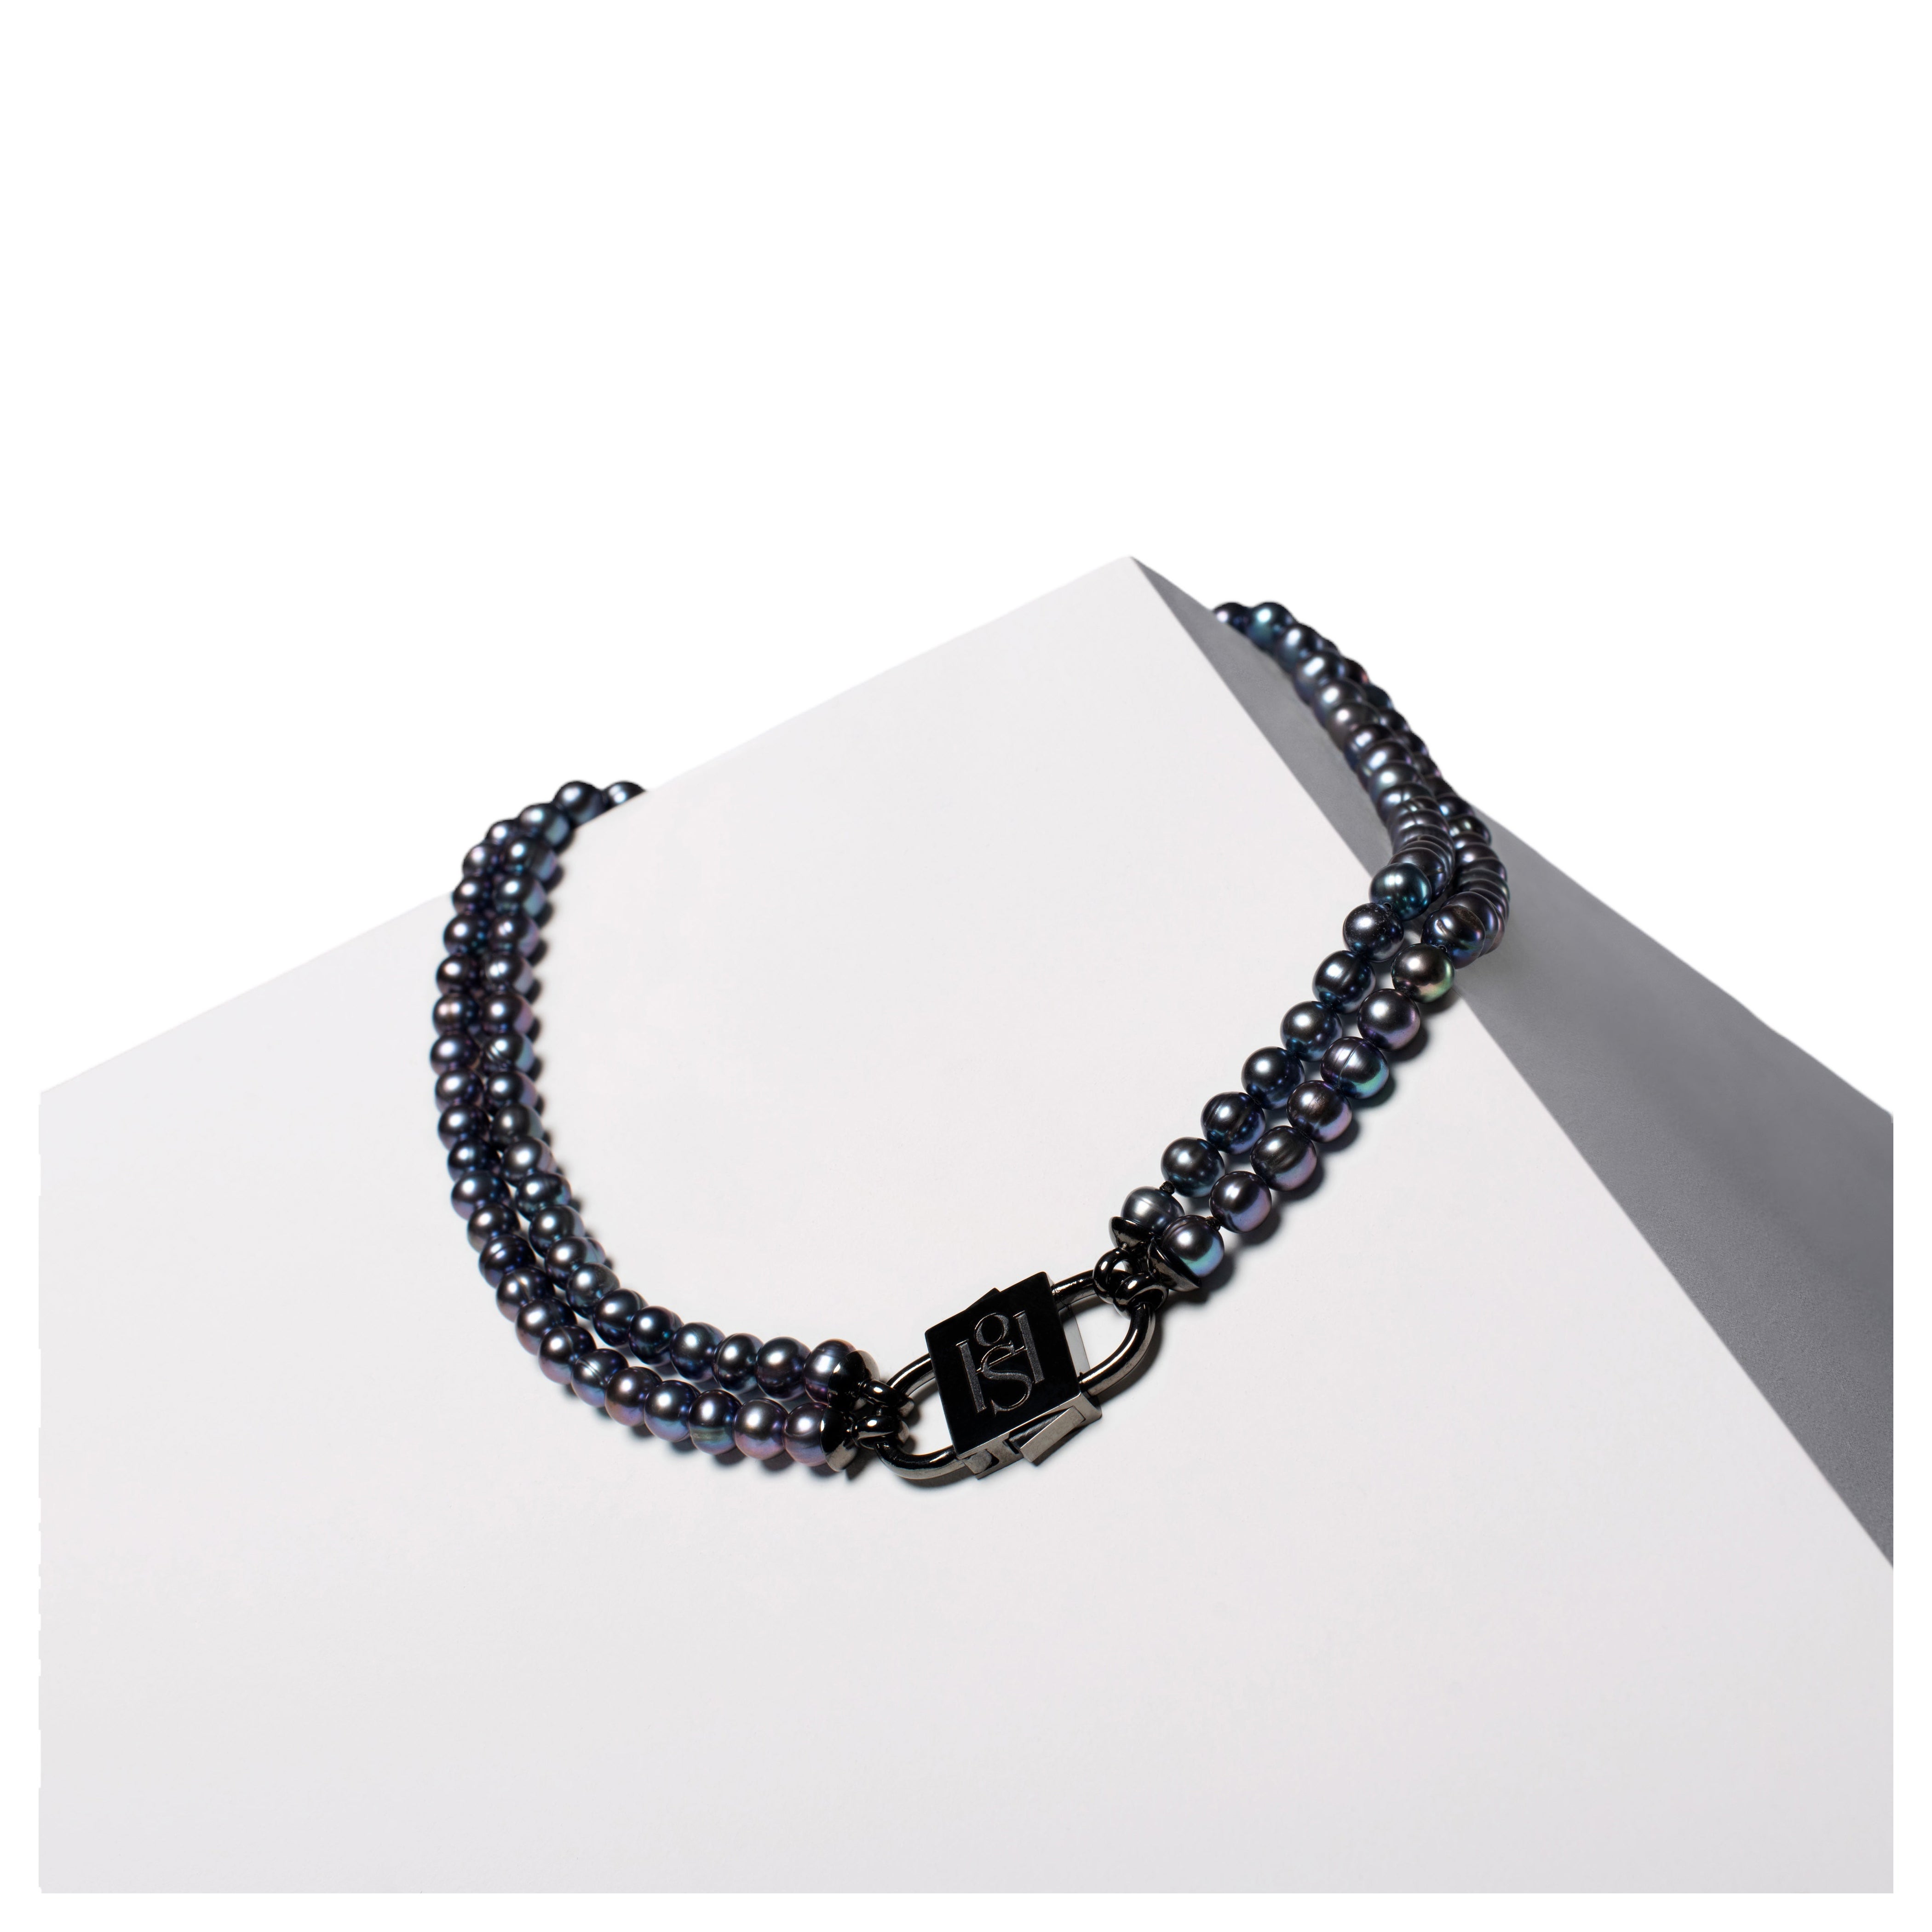 House of Sol Double String Peacock Black Pearl Necklace with HoS Lock